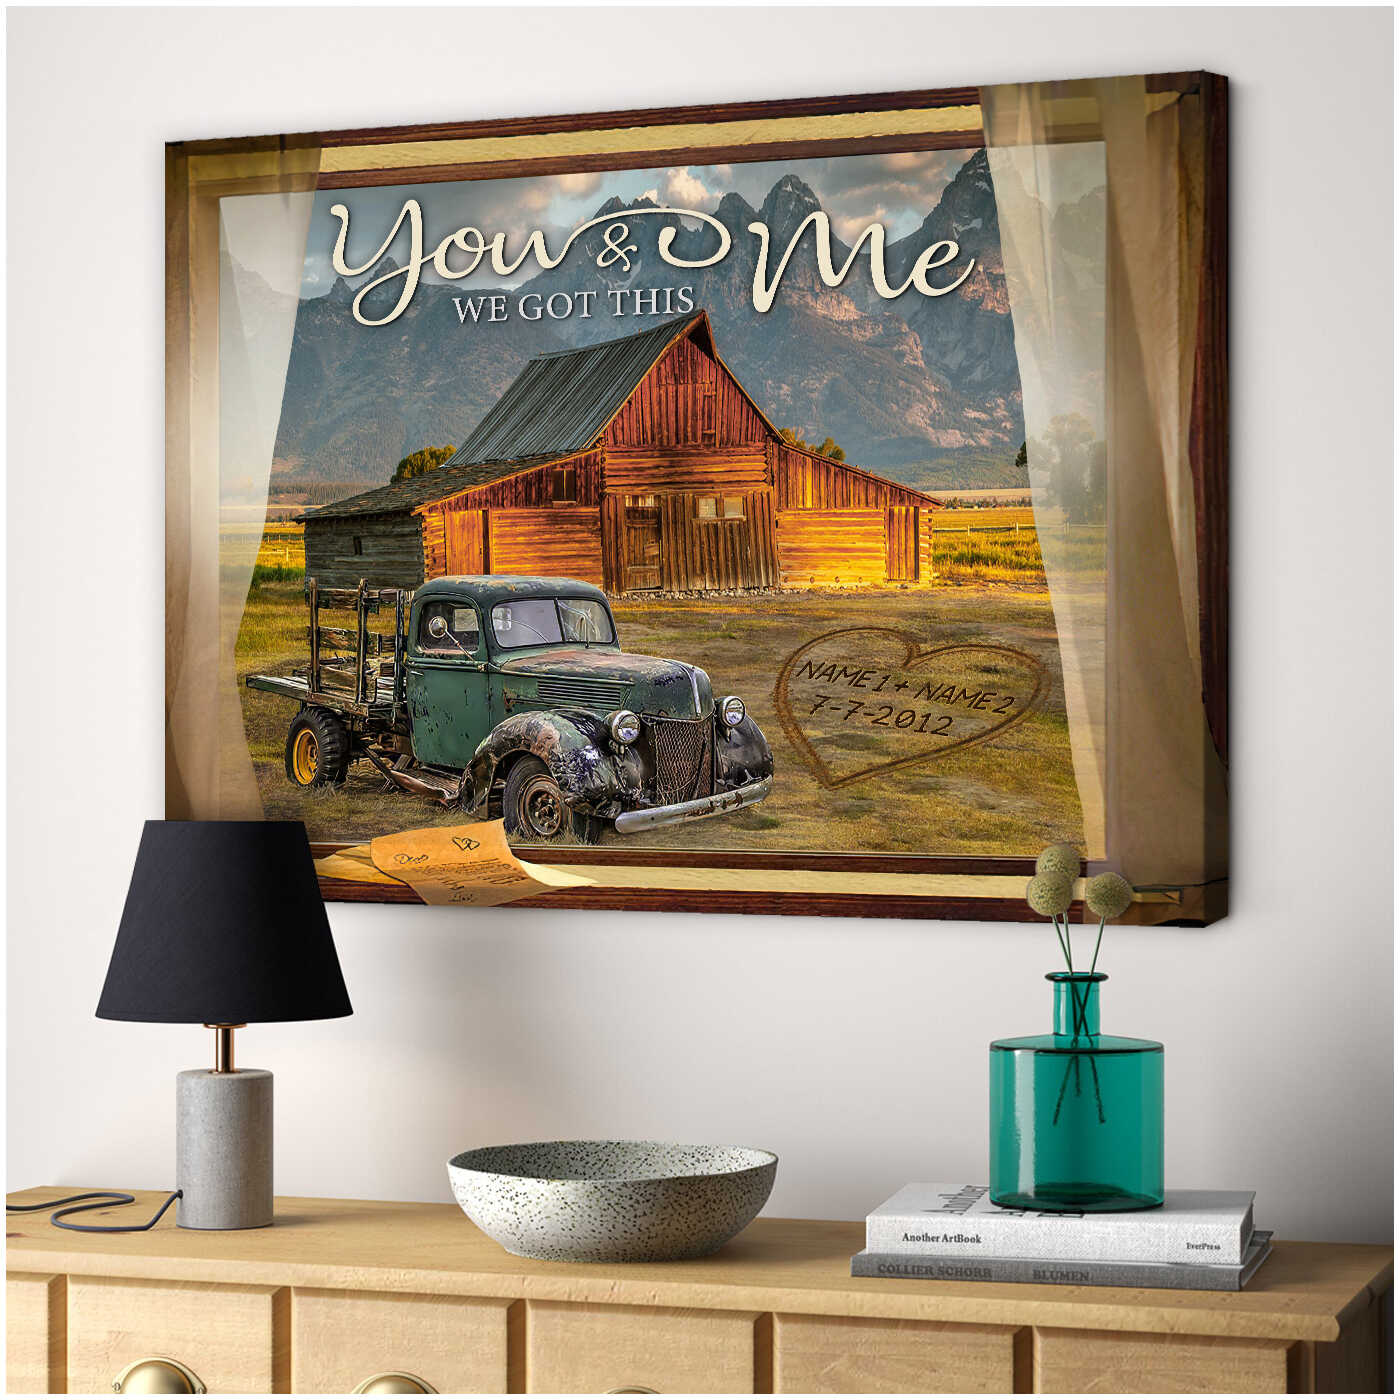 You And Me We Got This Beautiful Country Barn And Truck Landscape Window Custom Name And Date Canvas Prints Wall Art Decor